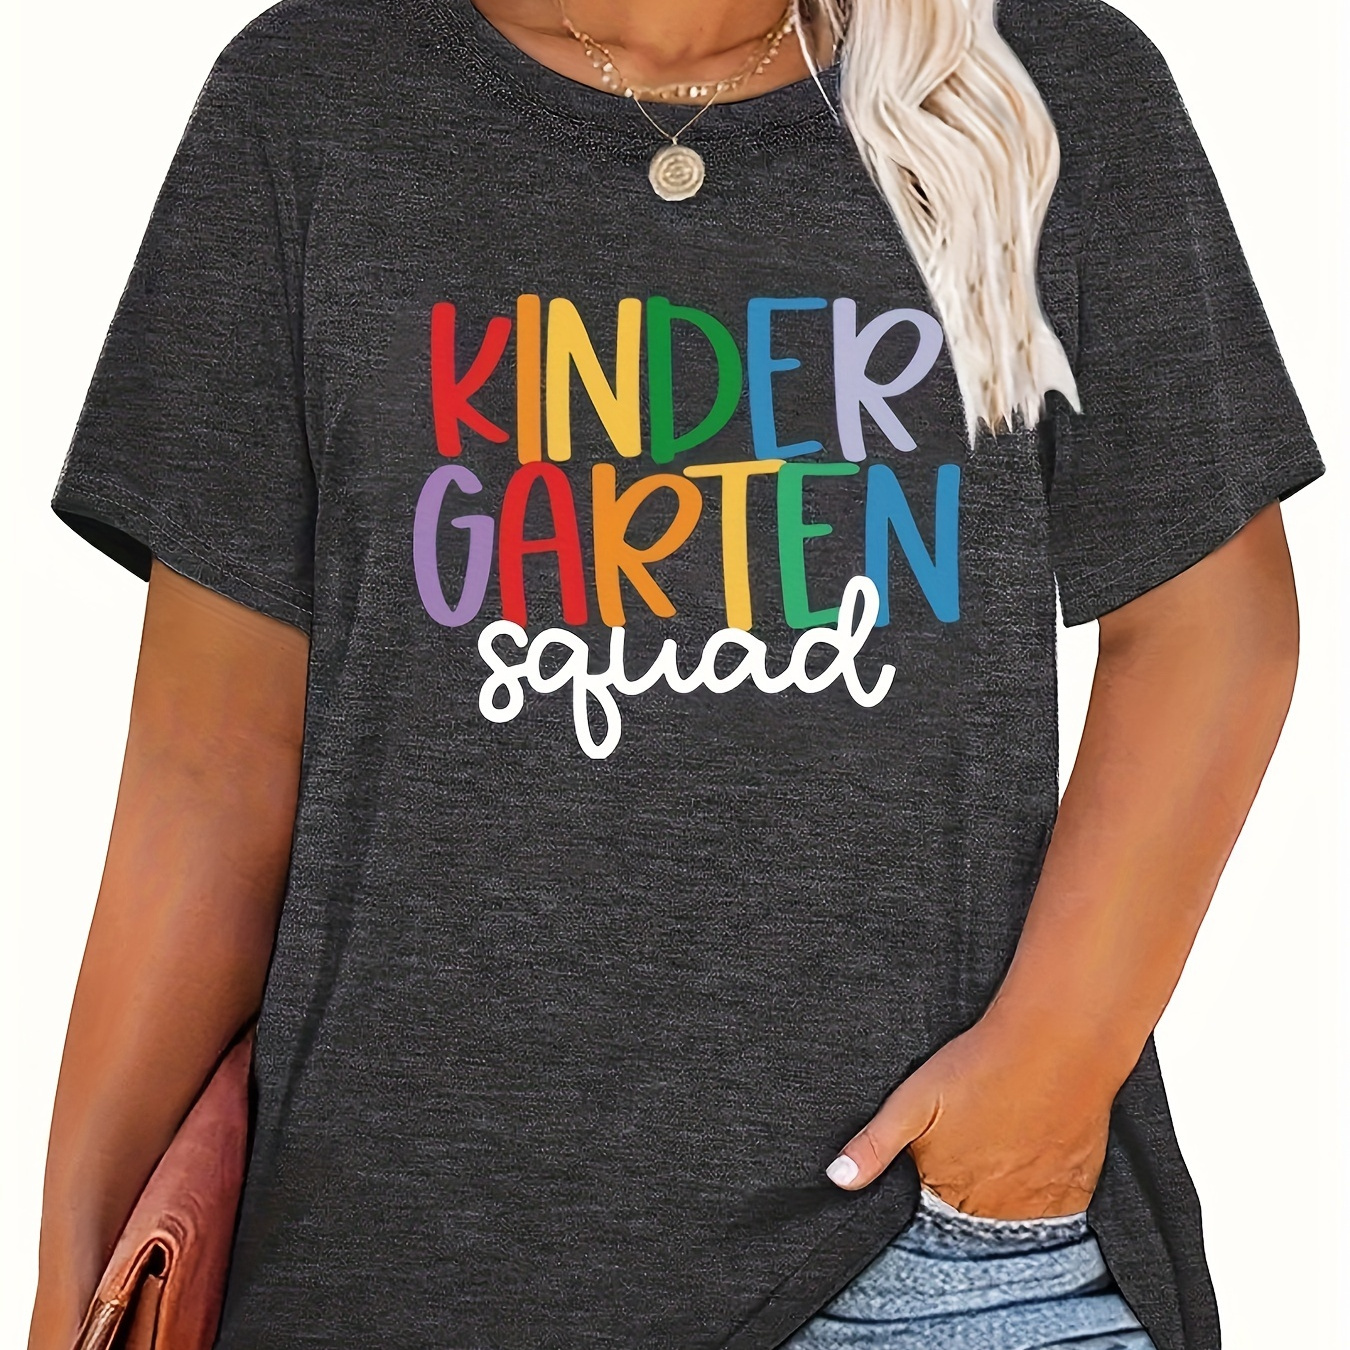 

Plus Size Kindergarten Print T-shirt, Casual Crew Neck Short Sleeve Top For Spring & Summer, Women's Plus Size Clothing